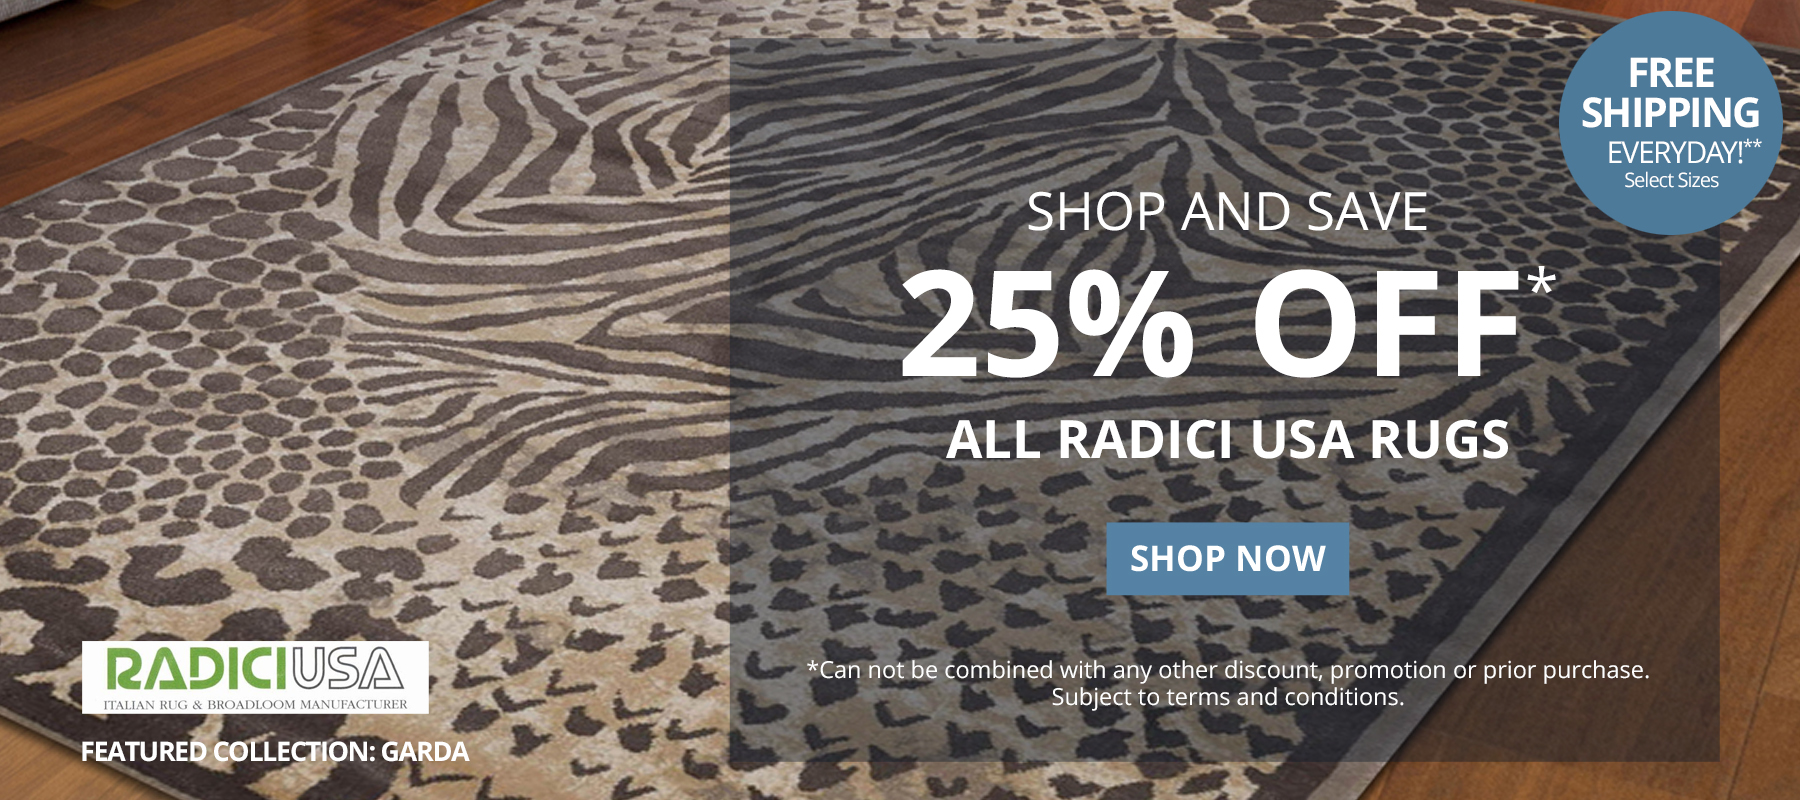 Shop and Save 25% Off* All Radici USA Rugs. Free Shipping Everyday!** Select Sizes. *Can not be combined with any other discount, promotion or prior purchase. Subject to terms and conditions. Shop Now.